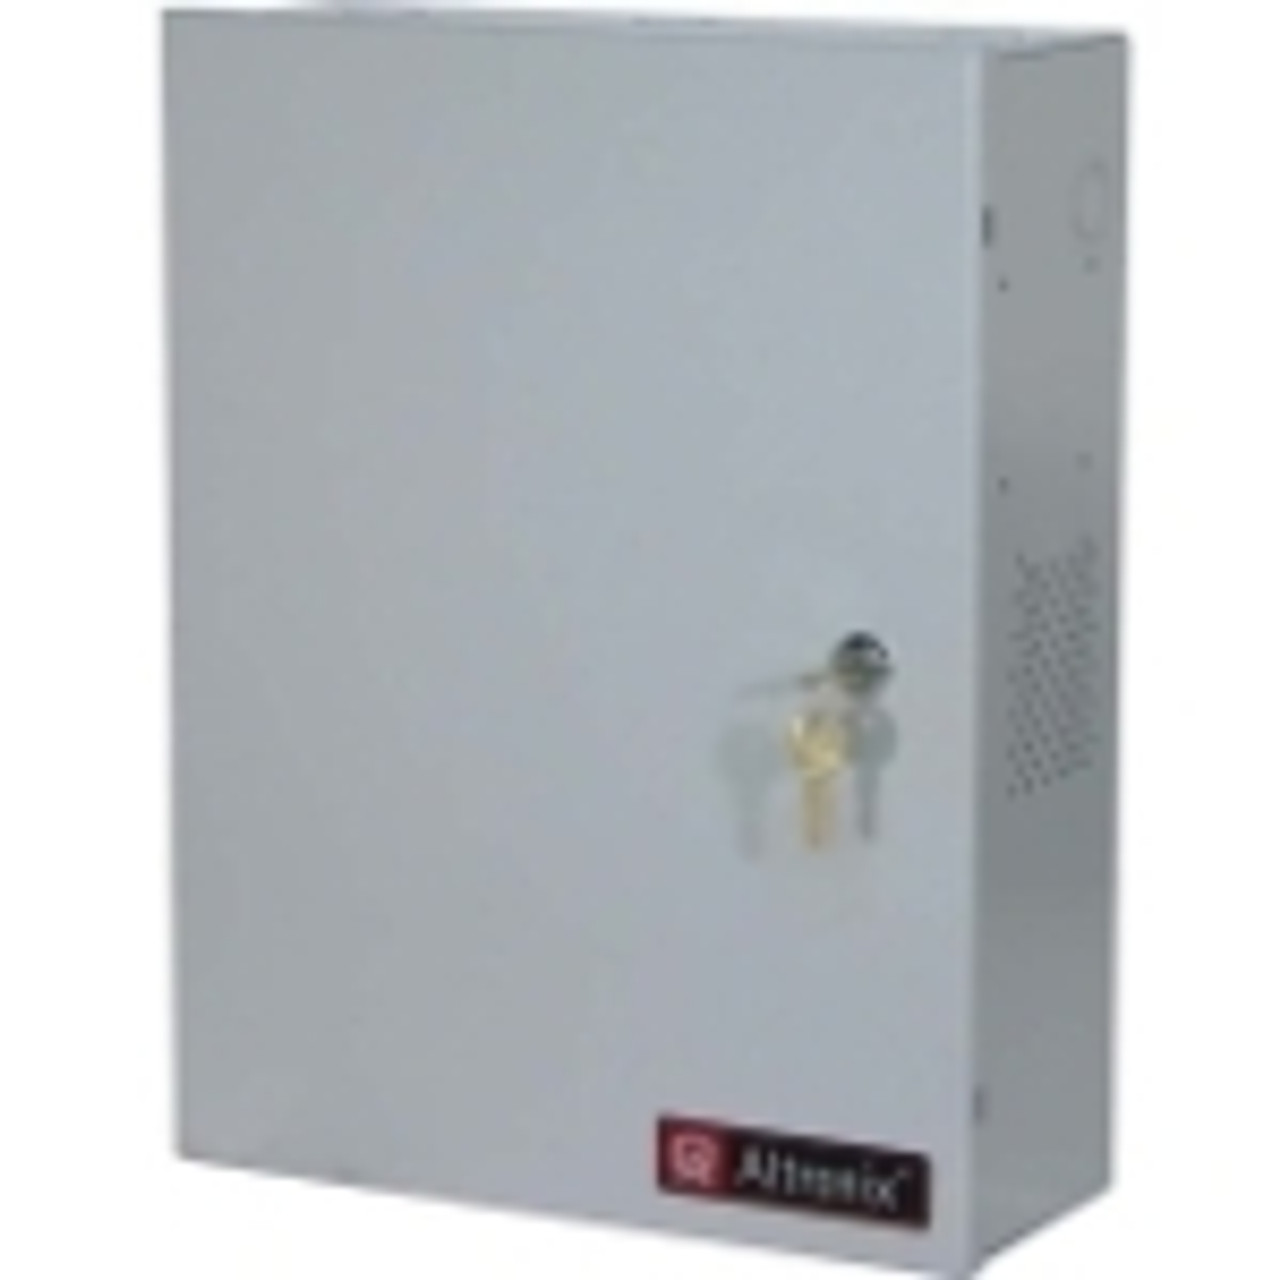 SMP10C12XX Altronix Single Output Power Supply/Charger. 12VDC @ 10A. Grey Enclosure 110 V AC Input Voltage Wall Mount